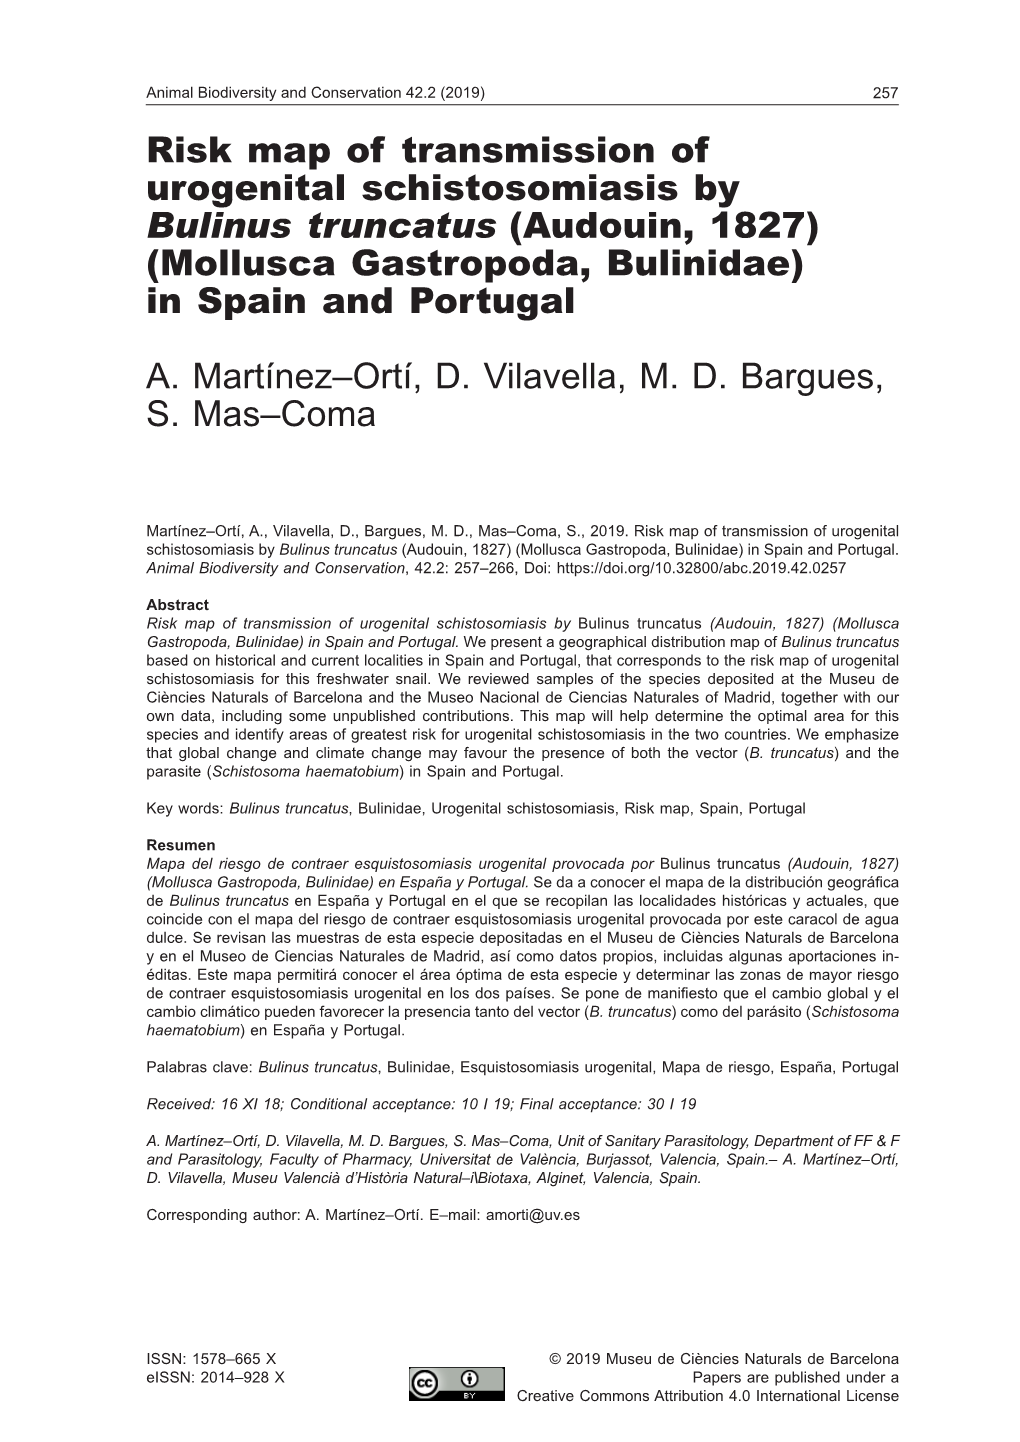 Risk Map of Transmission of Urogenital Schistosomiasis by Bulinus Truncatus (Audouin, 1827) (Mollusca Gastropoda, Bulinidae) in Spain and Portugal